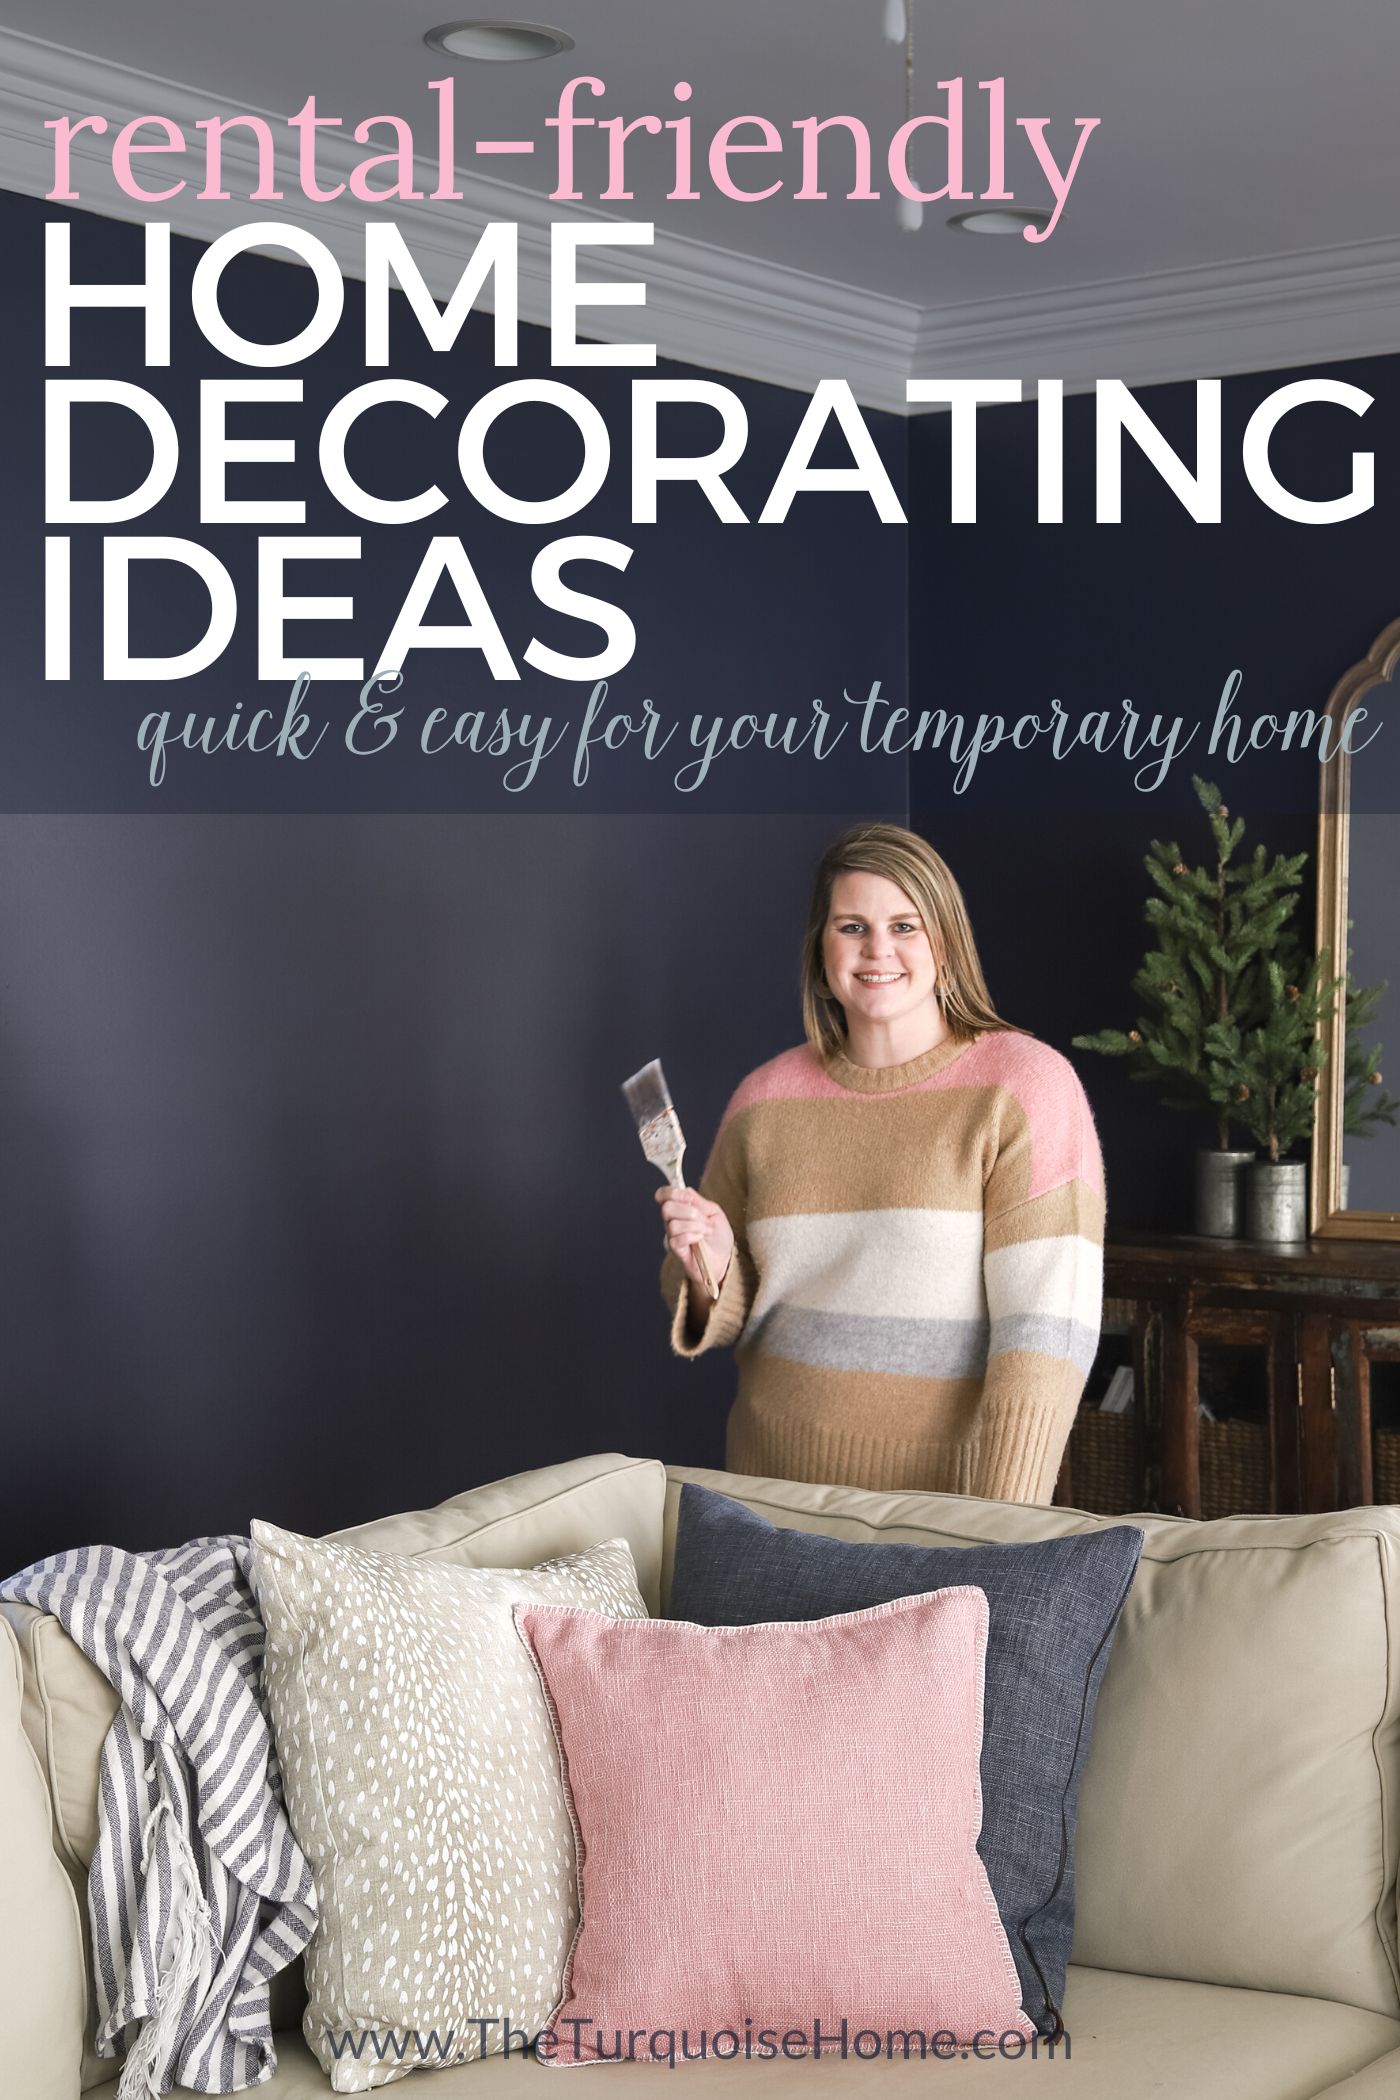 Rental-friendly Home Decorating Ideas with woman holding paint brush